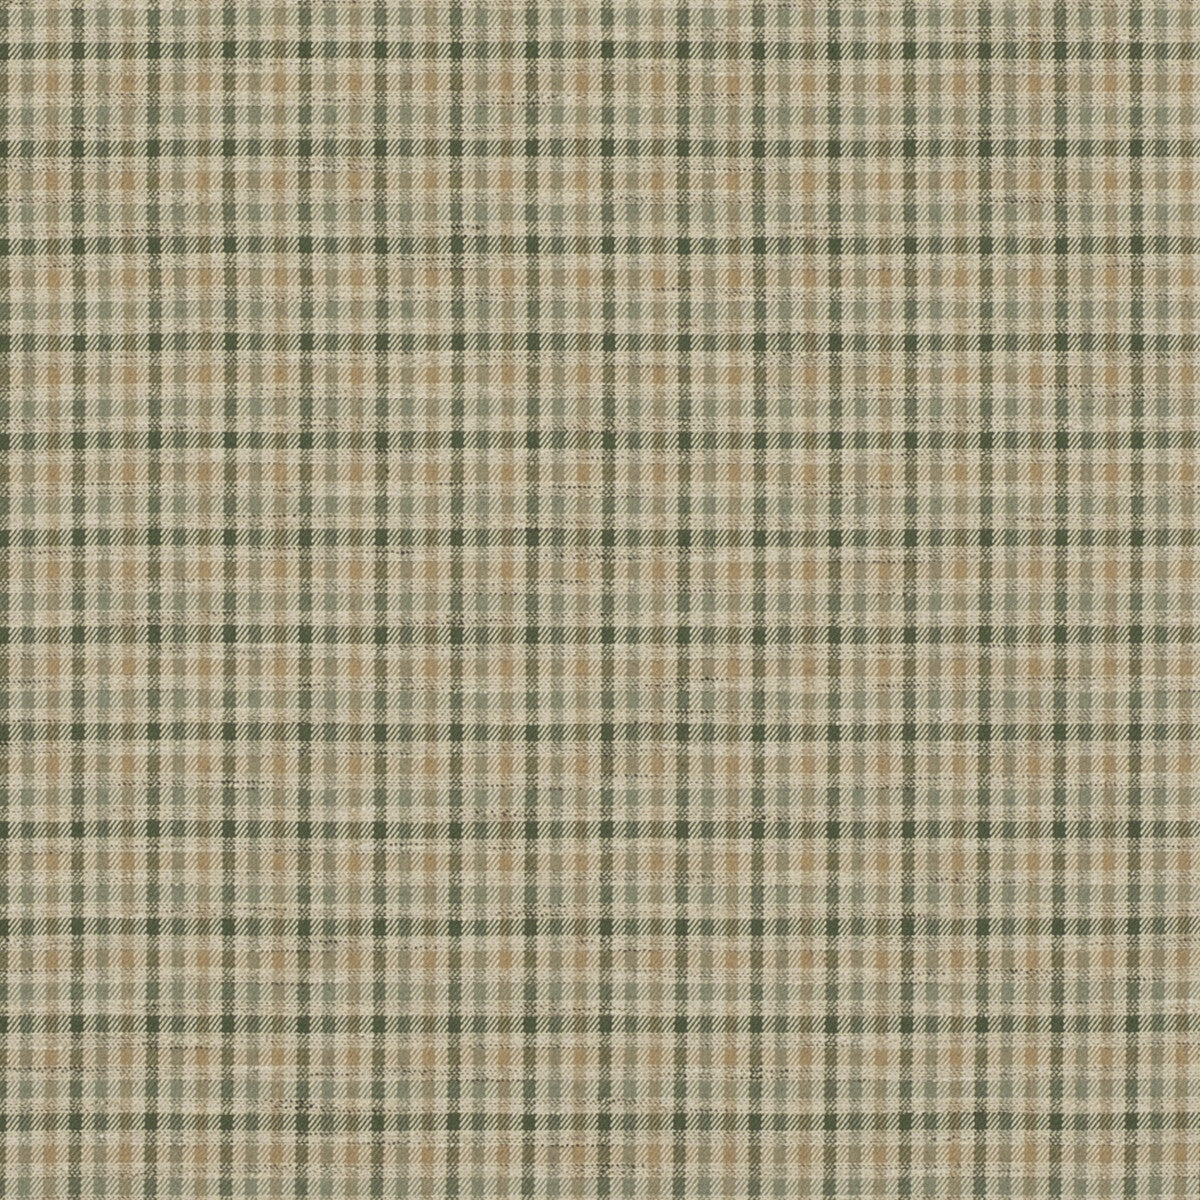 Babington Check fabric in green/sand color - pattern FD810.S25.0 - by Mulberry in the Icons Fabrics collection